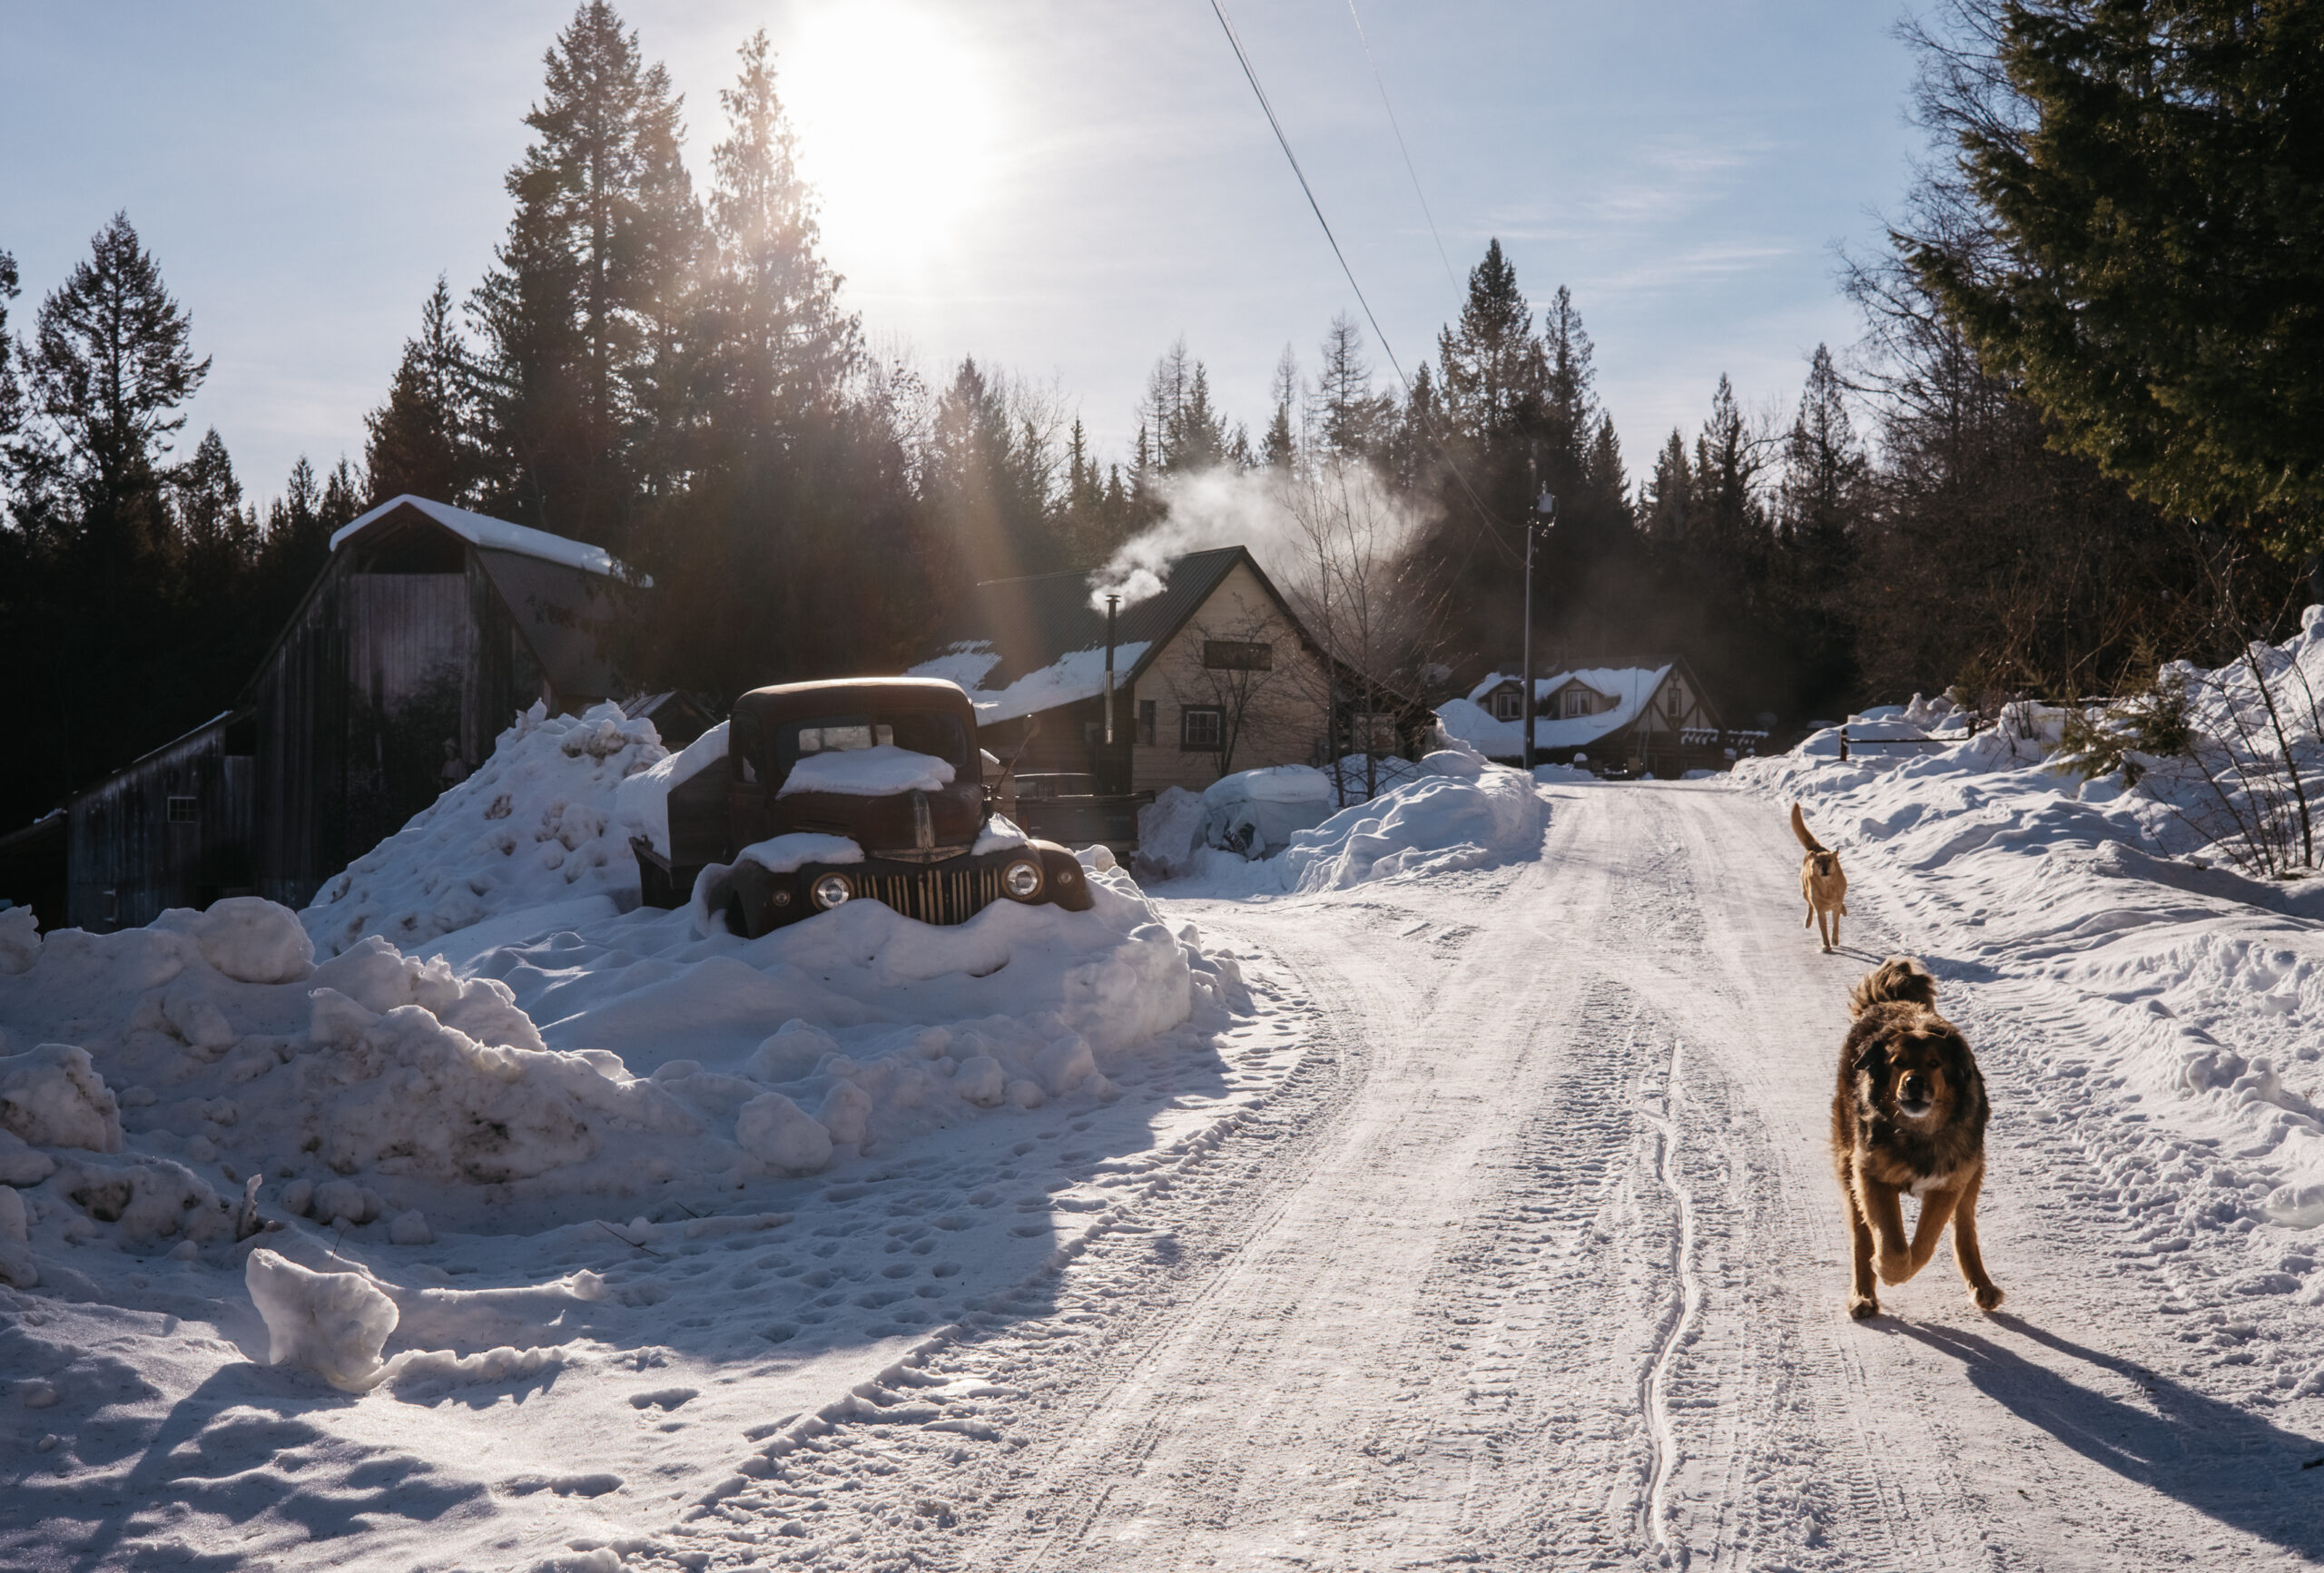 Dogs run to greet visitors to Son Ranch Timber Co. in Eholt, B.C. The family-run business owns two woodlots